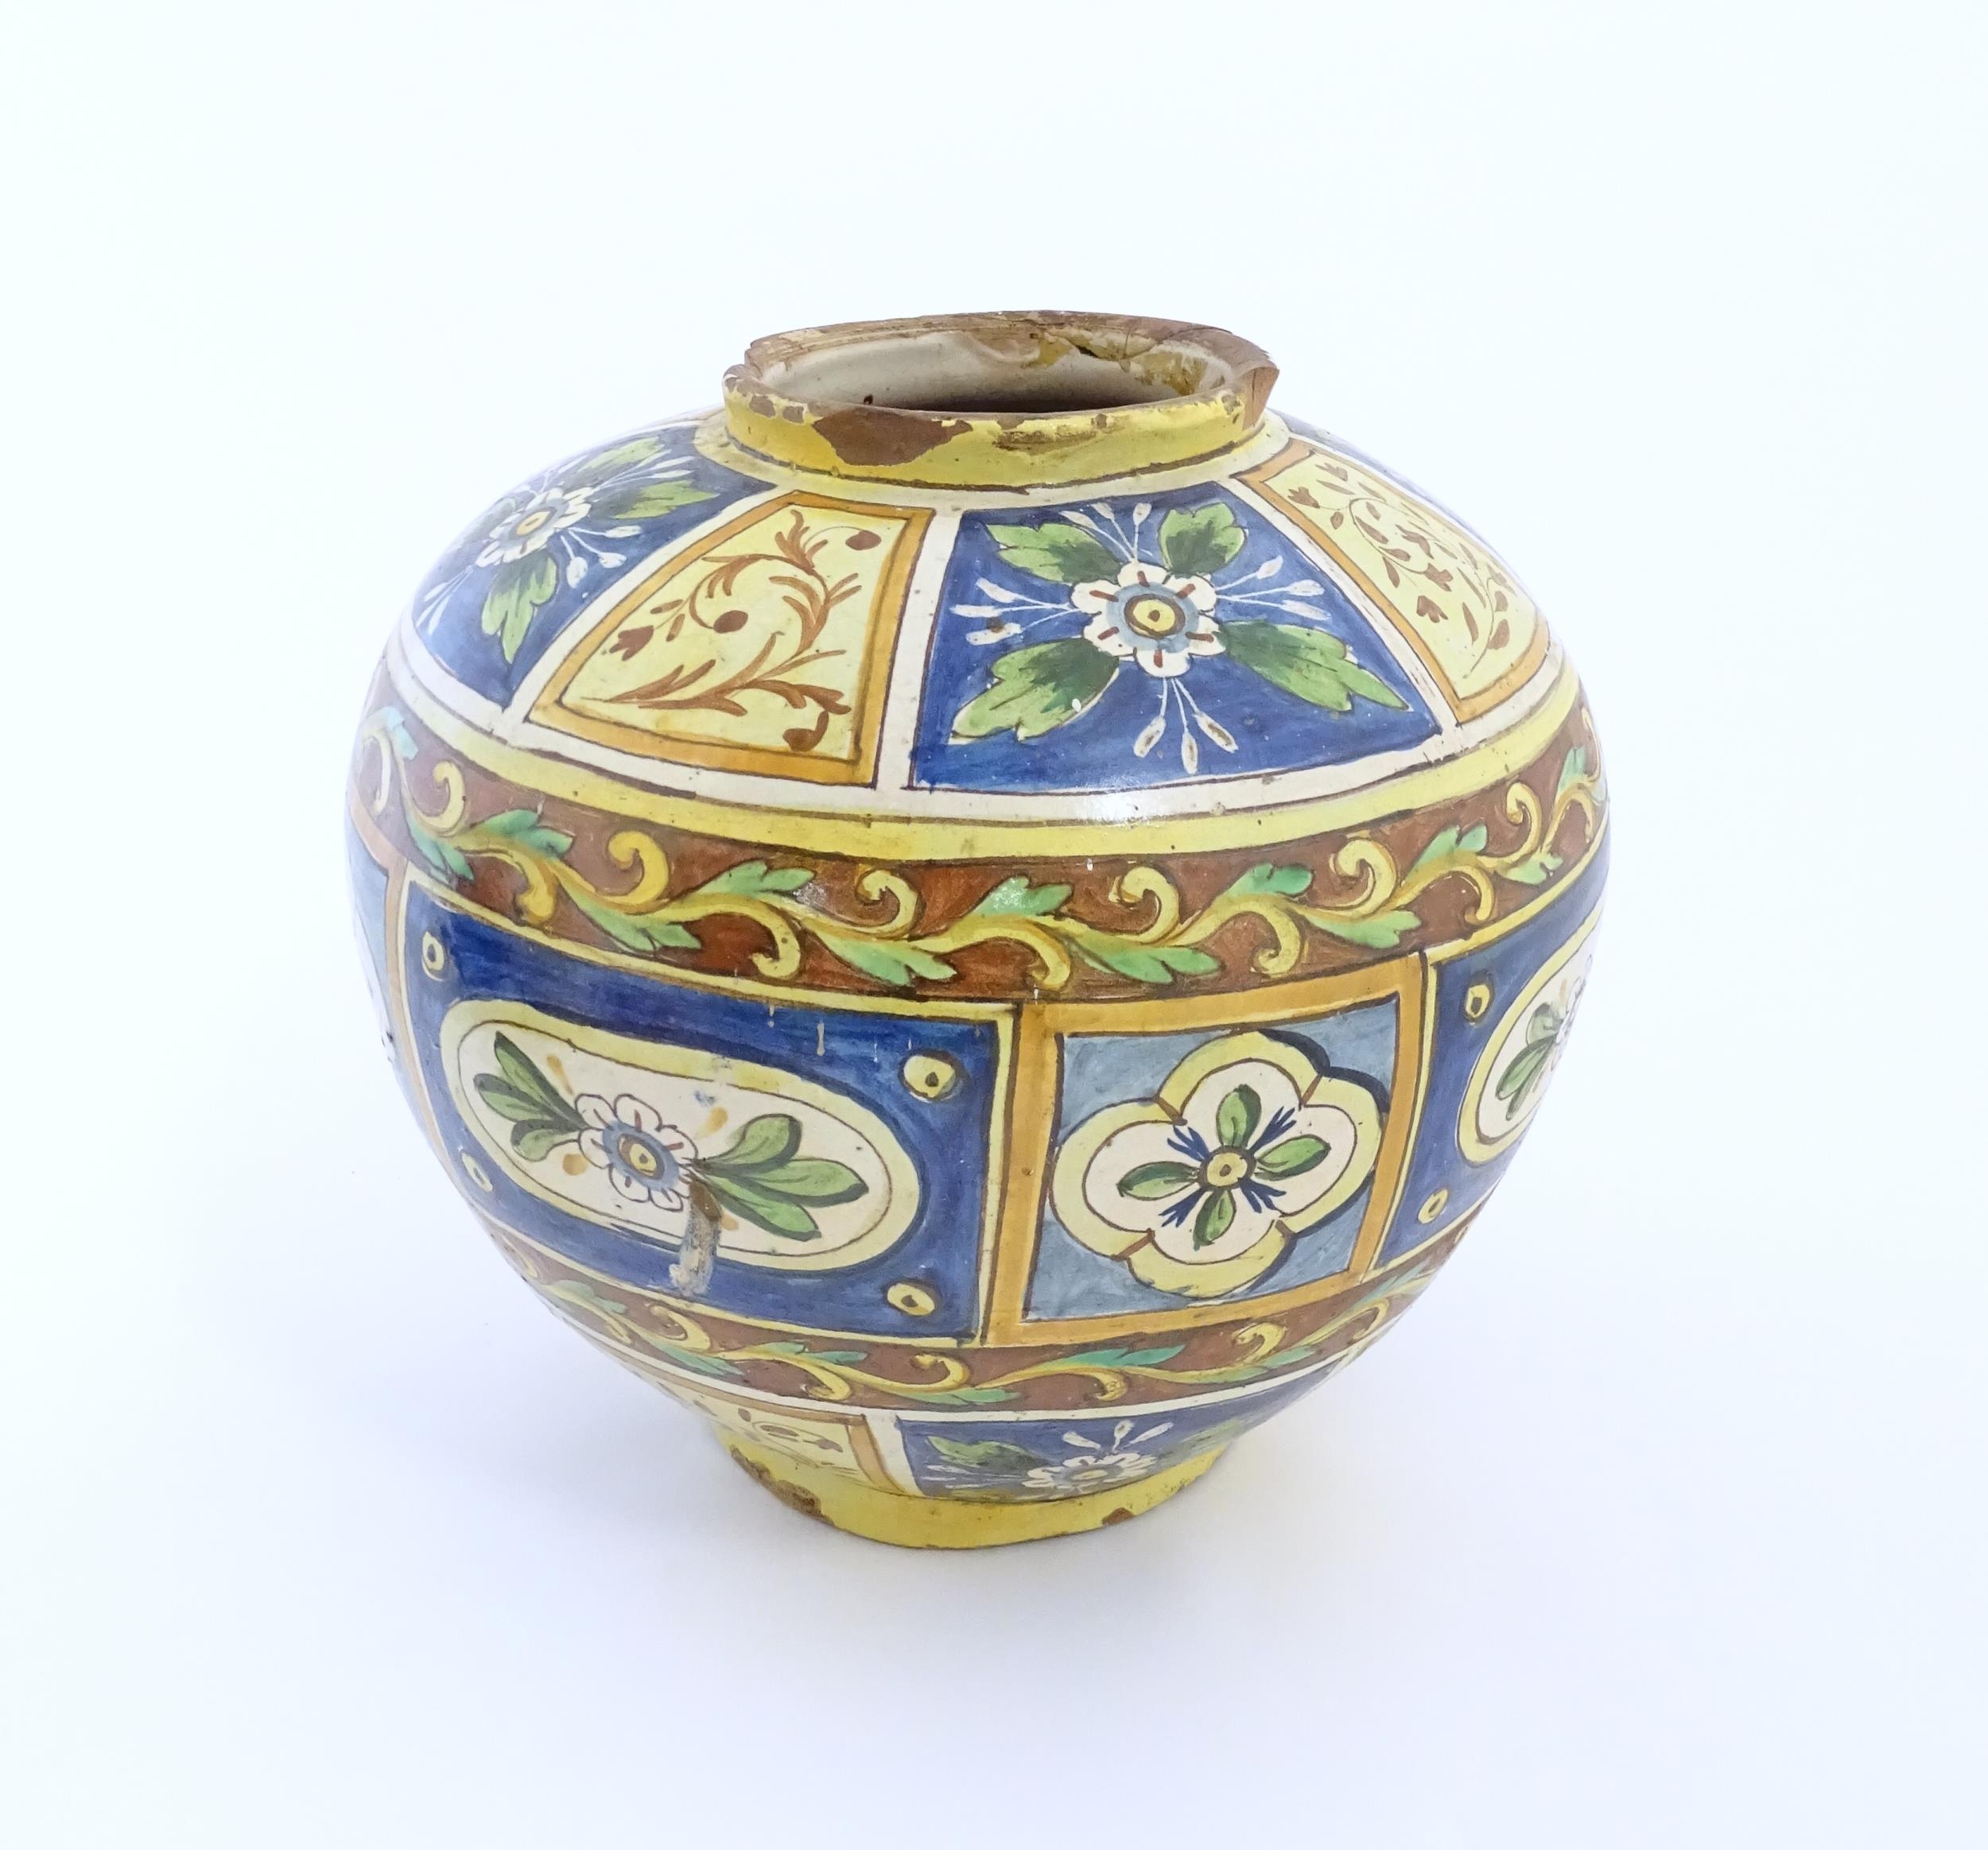 A Sicilian maiolica Bombola vase with panelled and banded decoration depicting flowers and - Image 9 of 10